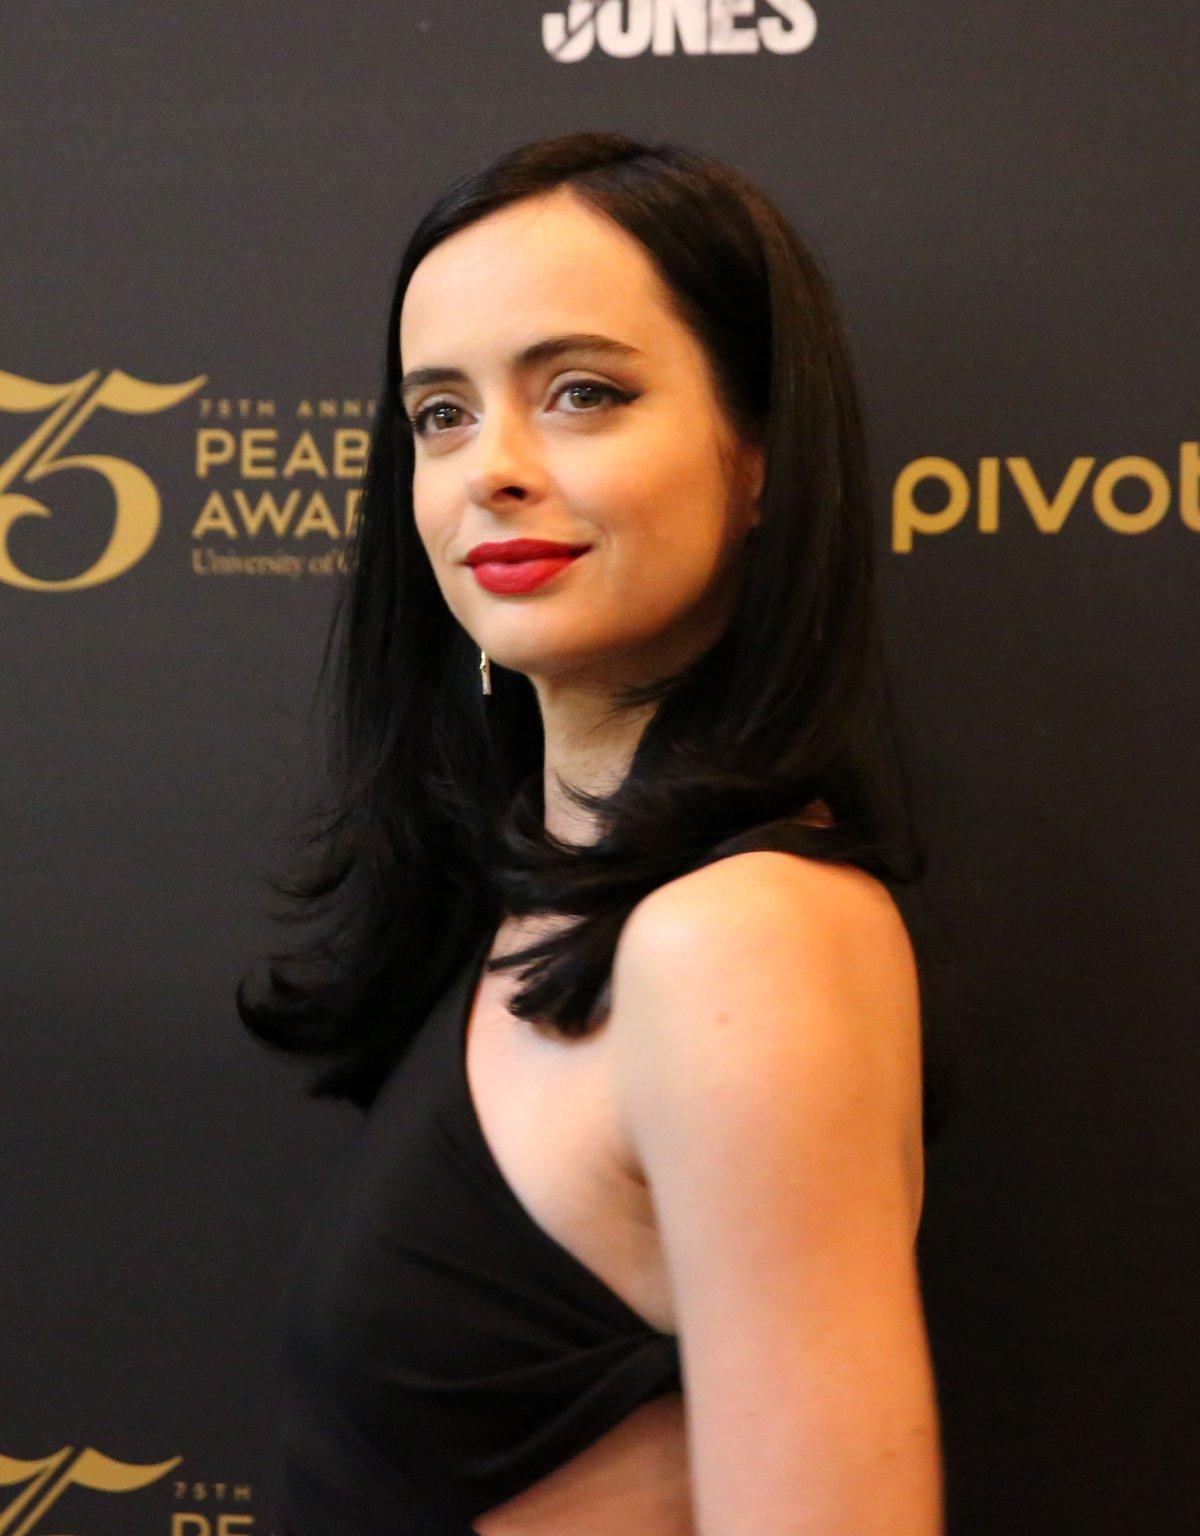 65+ Hot Pictures Of Krysten Ritter a.k.a Jessica Jones Of Marvel Along With Interesting Facts | Best Of Comic Books